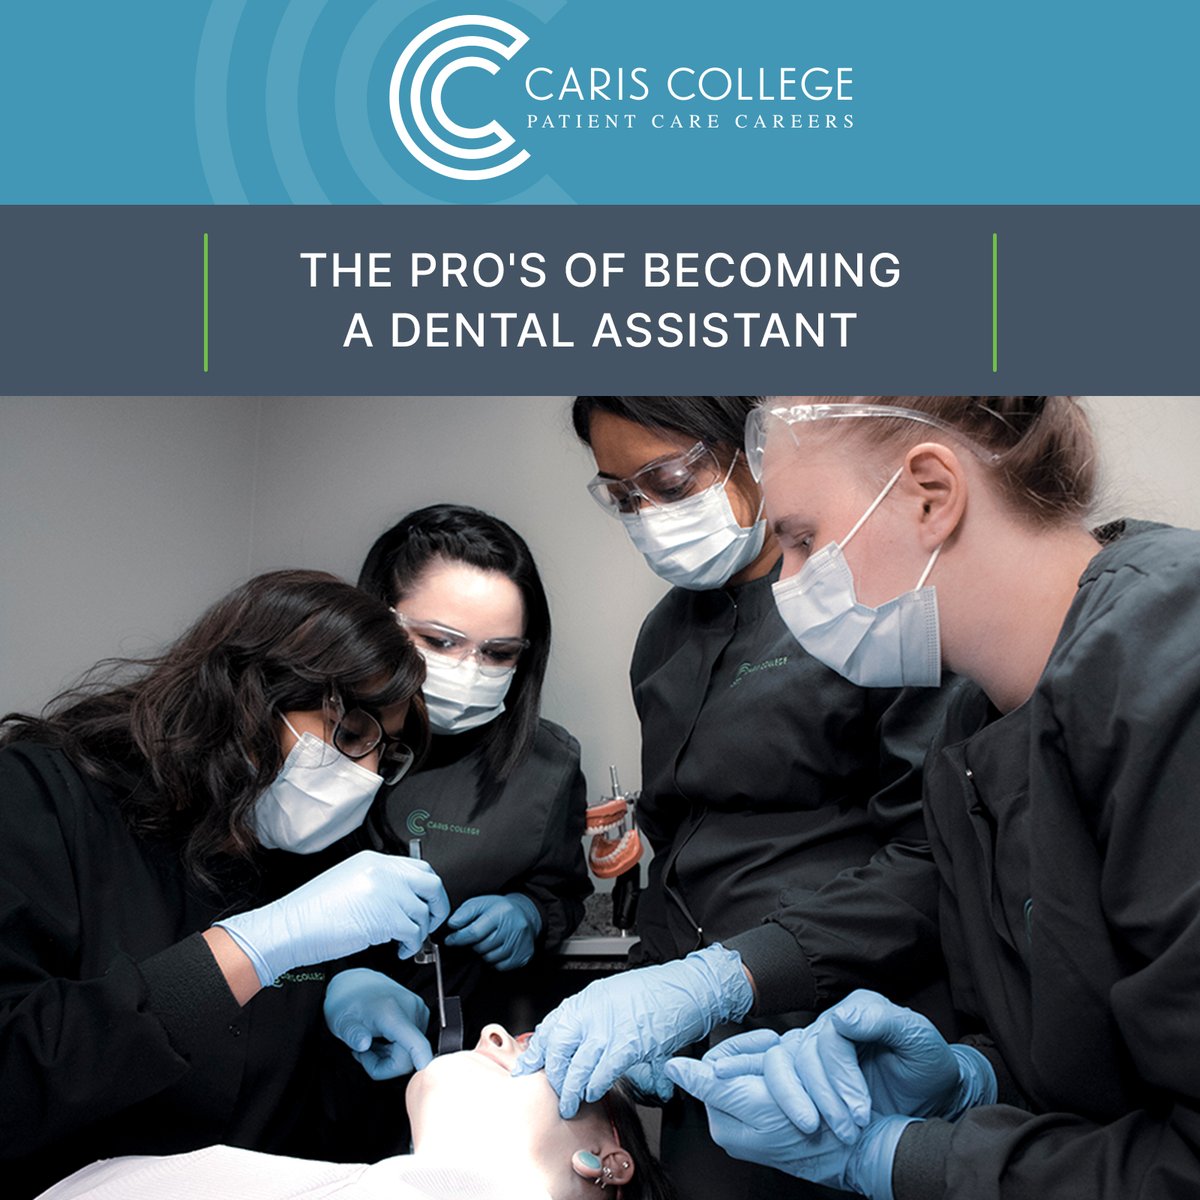 📖 Discover the perks of becoming a Dental Assistant in our latest blog post: bit.ly/3OQecuT #DentalAssistant #CarisCollege